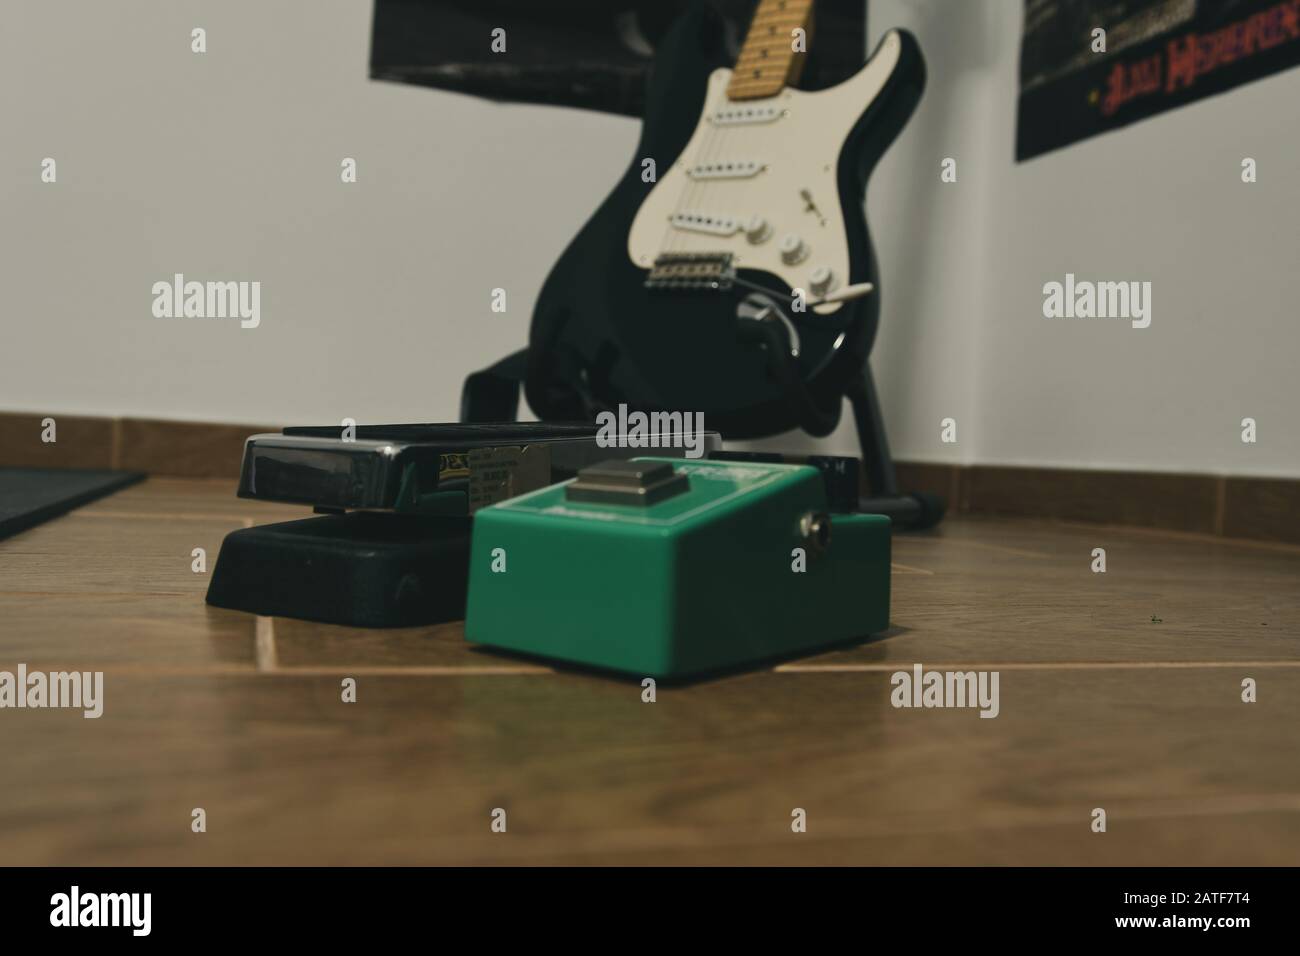 Eric Clapton Blackie Replica Fender electric guitar with pedals on the  floor Stock Photo - Alamy